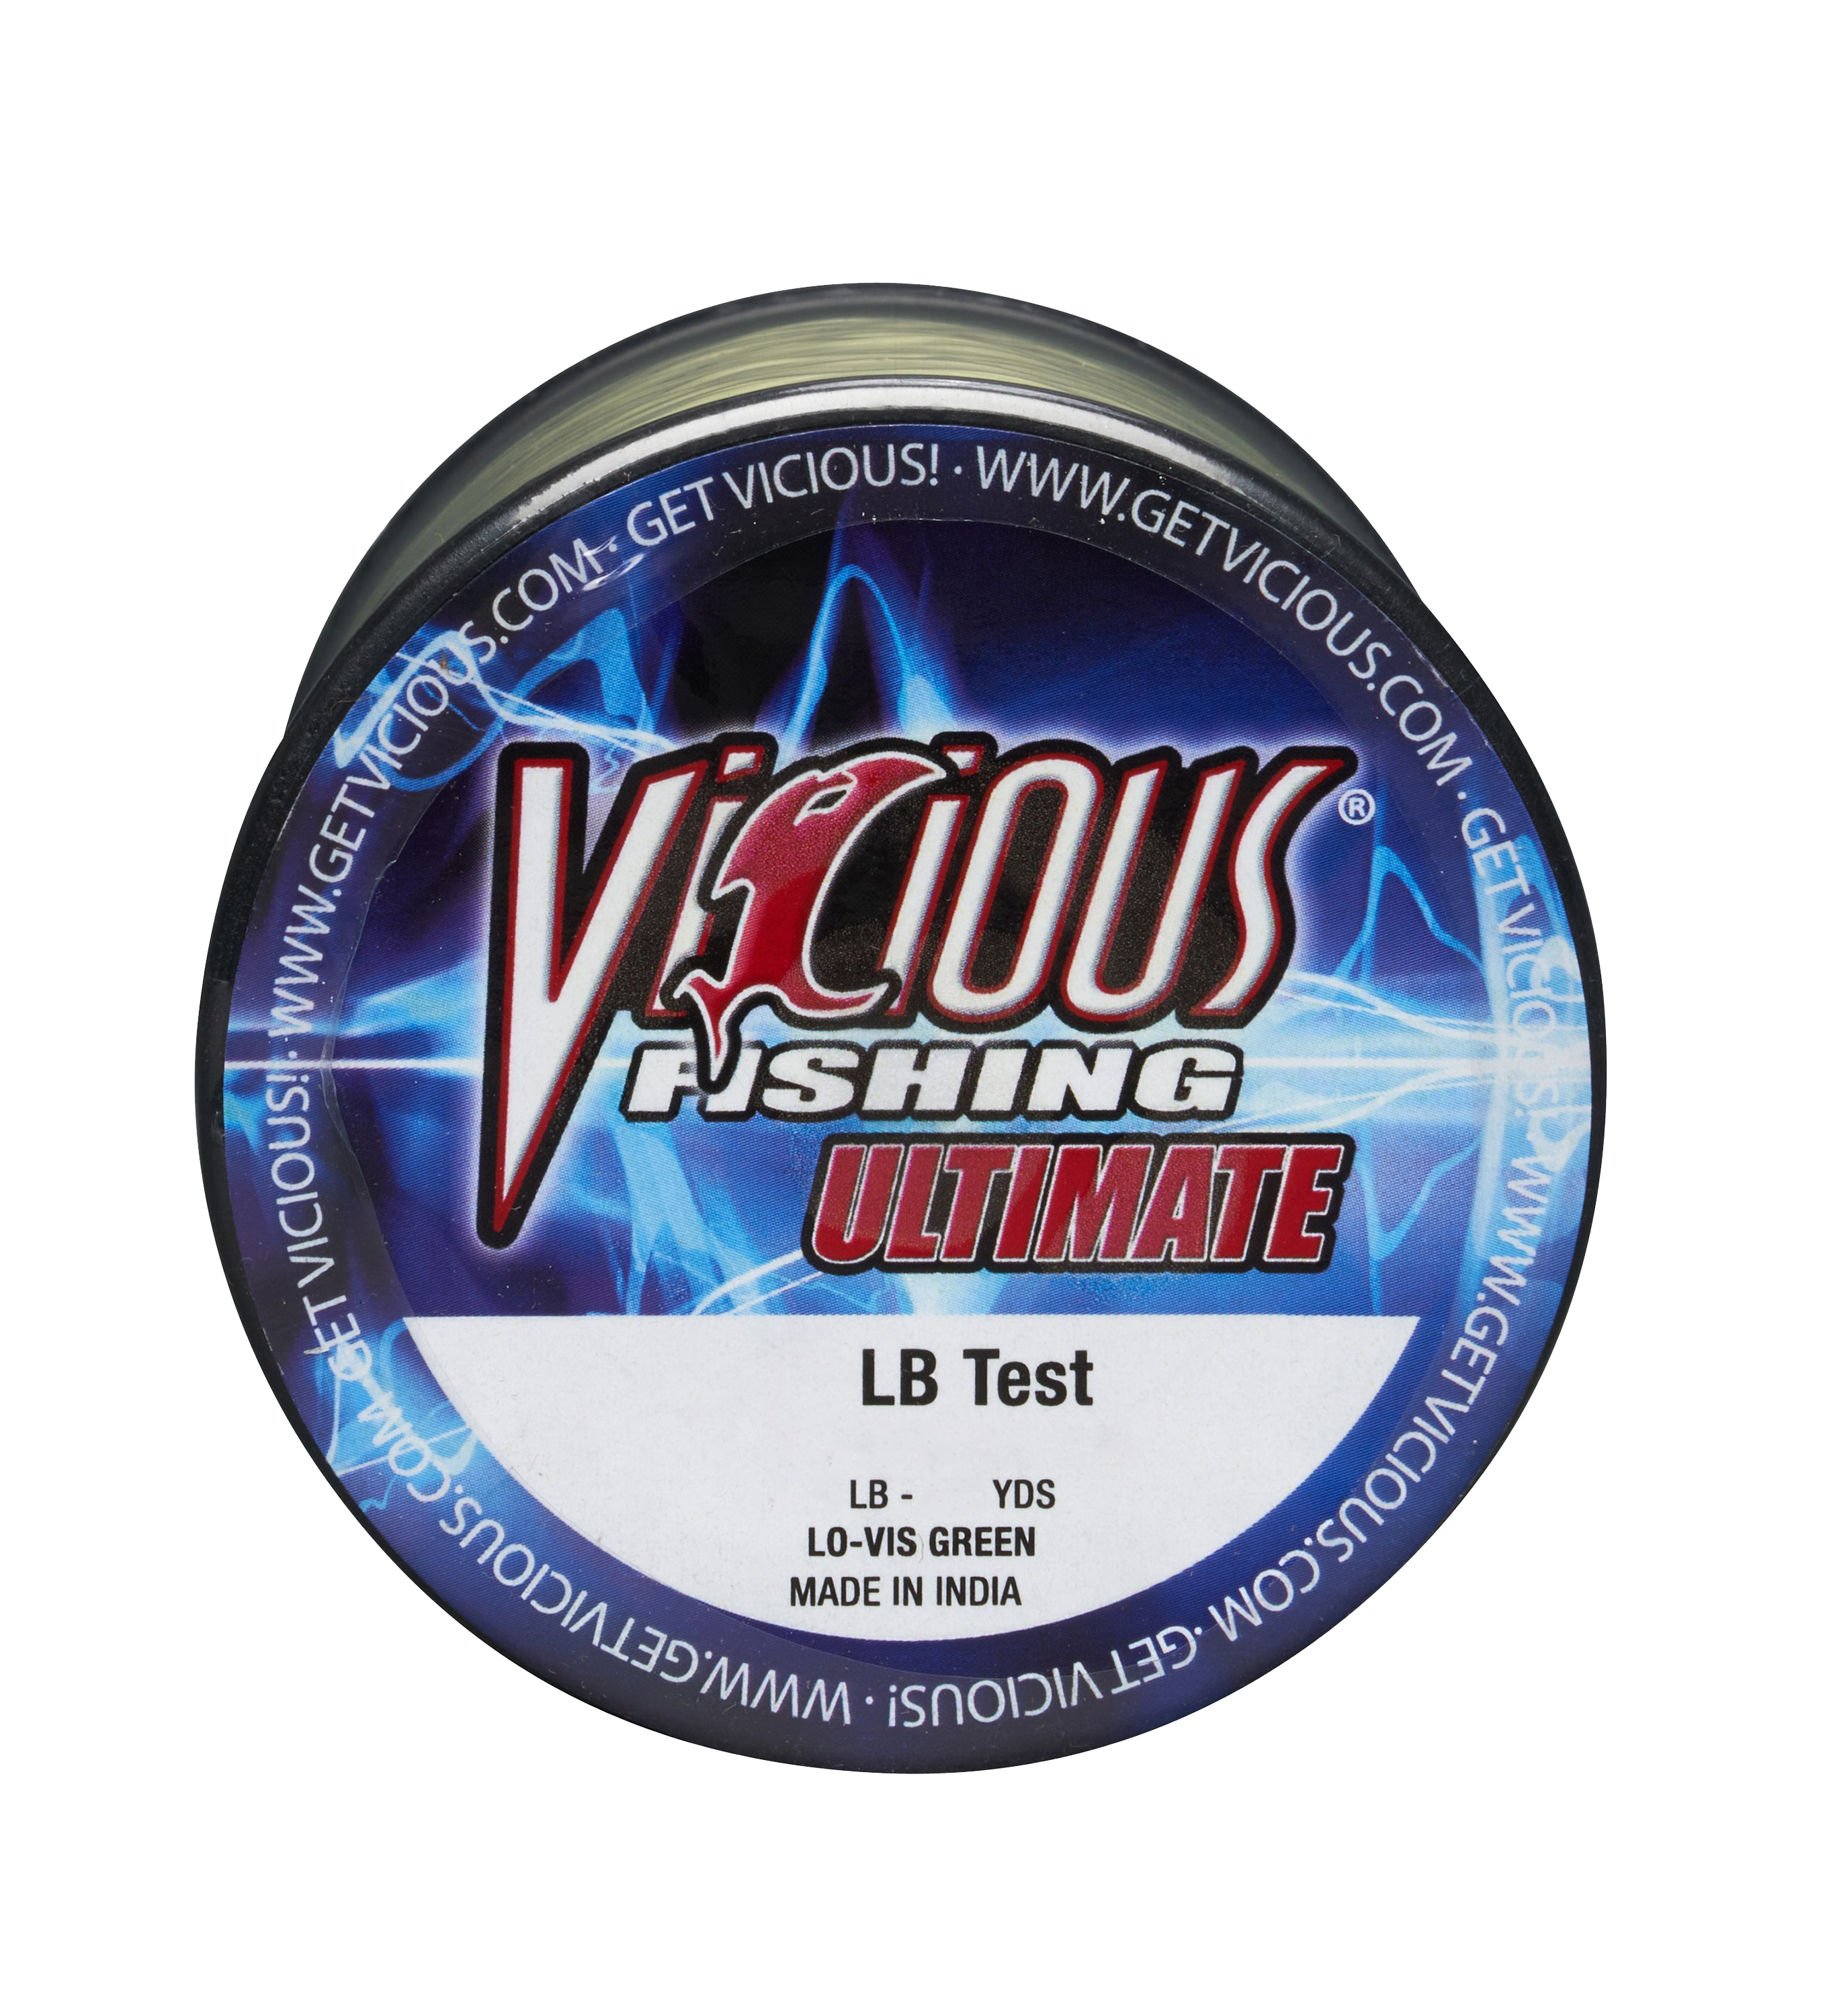 Vicious Fishing Ultimate, Clear, 4lb Test, 1lb Spool (11,200 Yards)